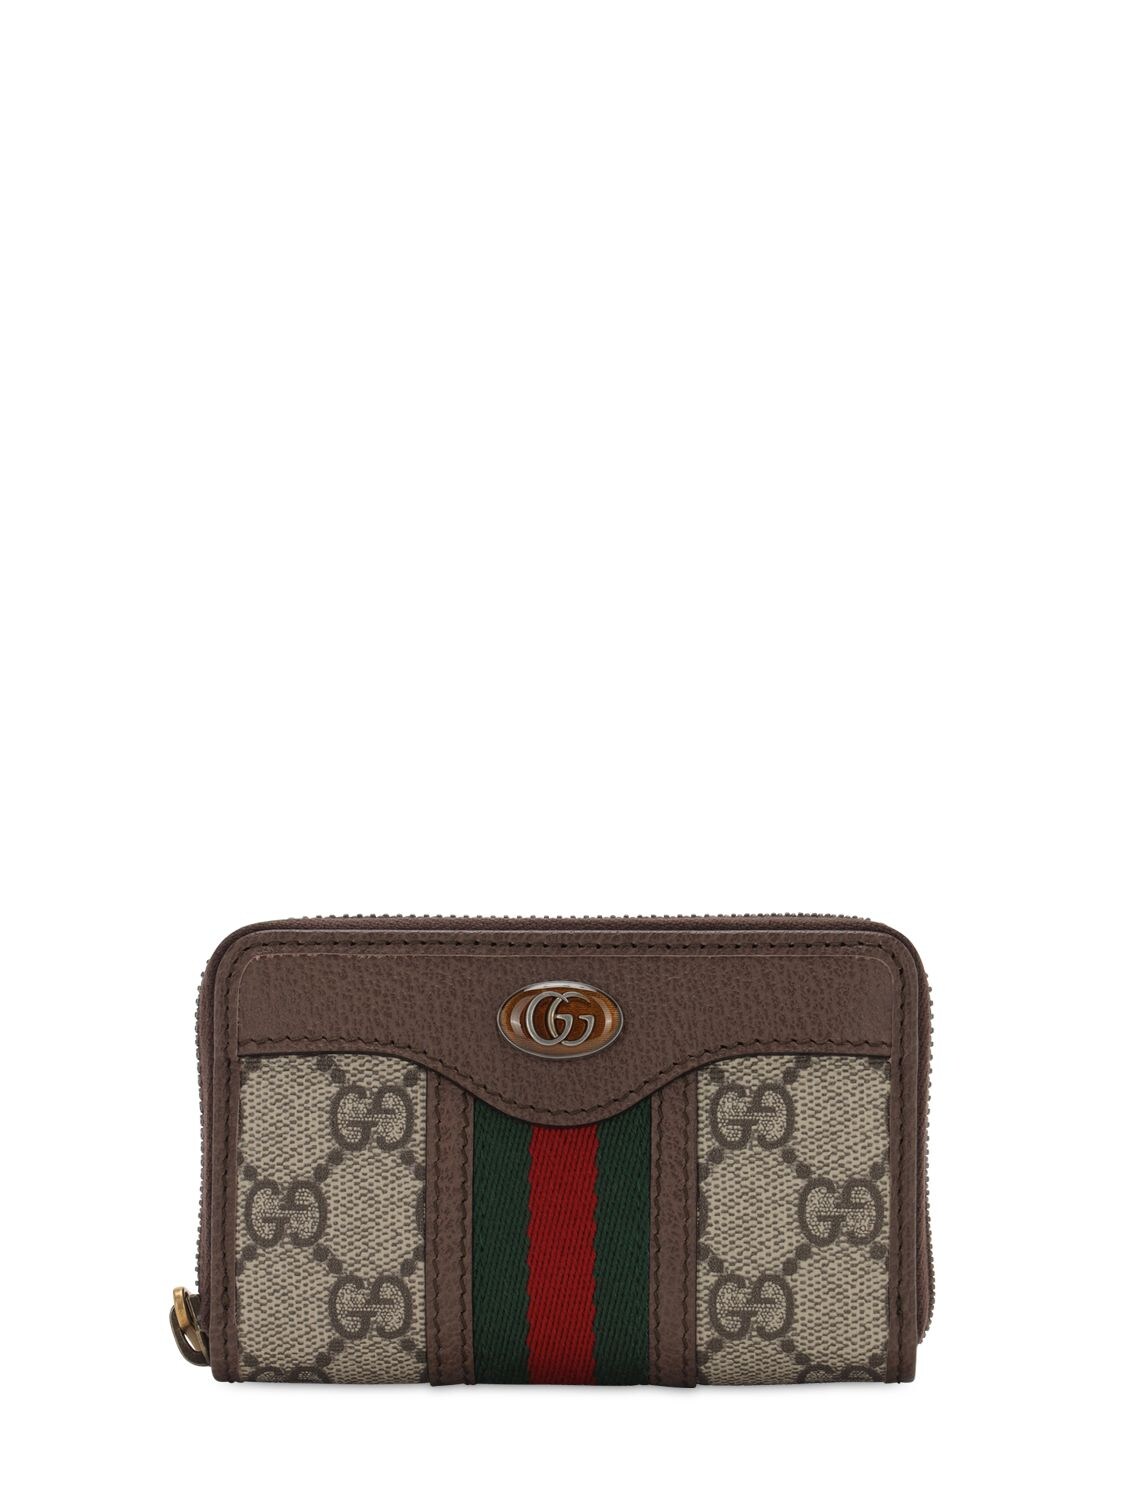 GUCCI GG CANVAS & LEATHER ZIP CARD HOLDER,72IGZF038-ODC0NQ2